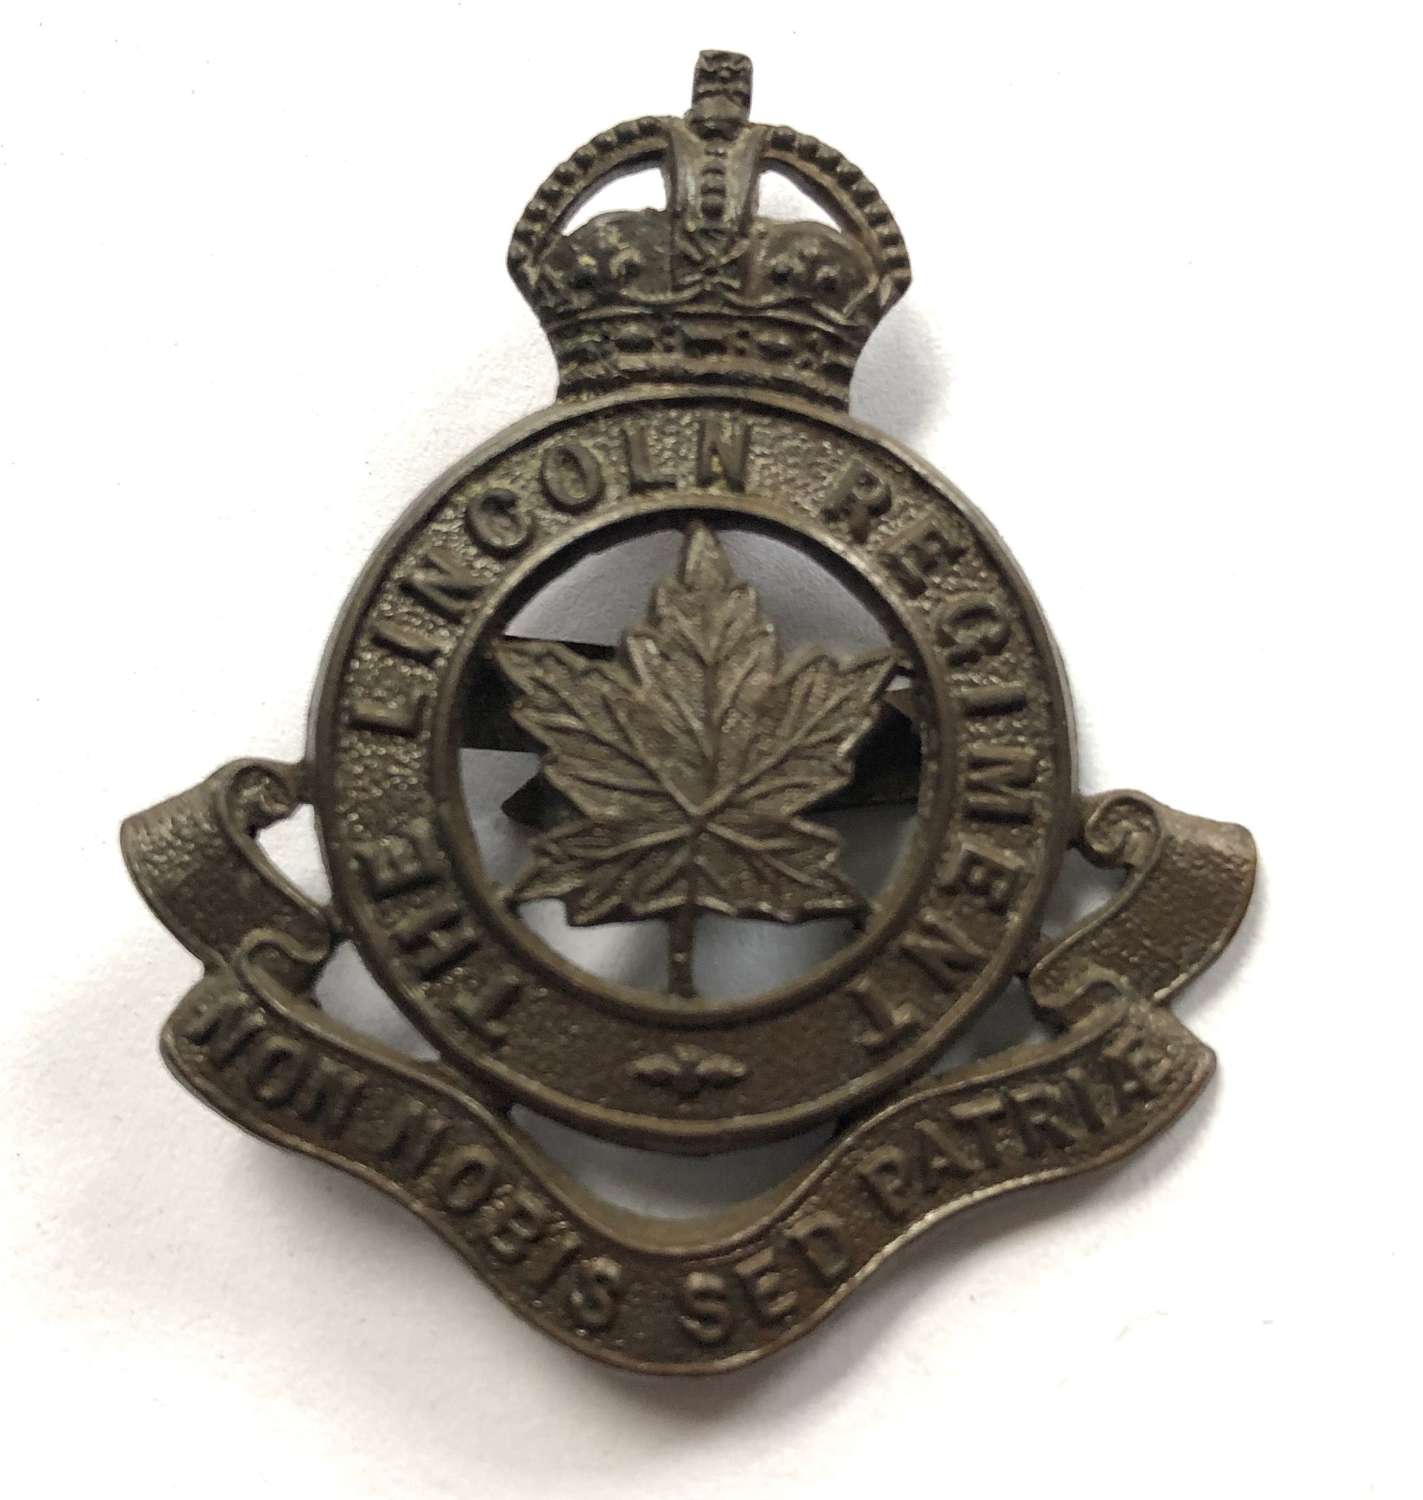 Canada. The Lincoln Regiment OSD cap badge by Gaunt c1927-36